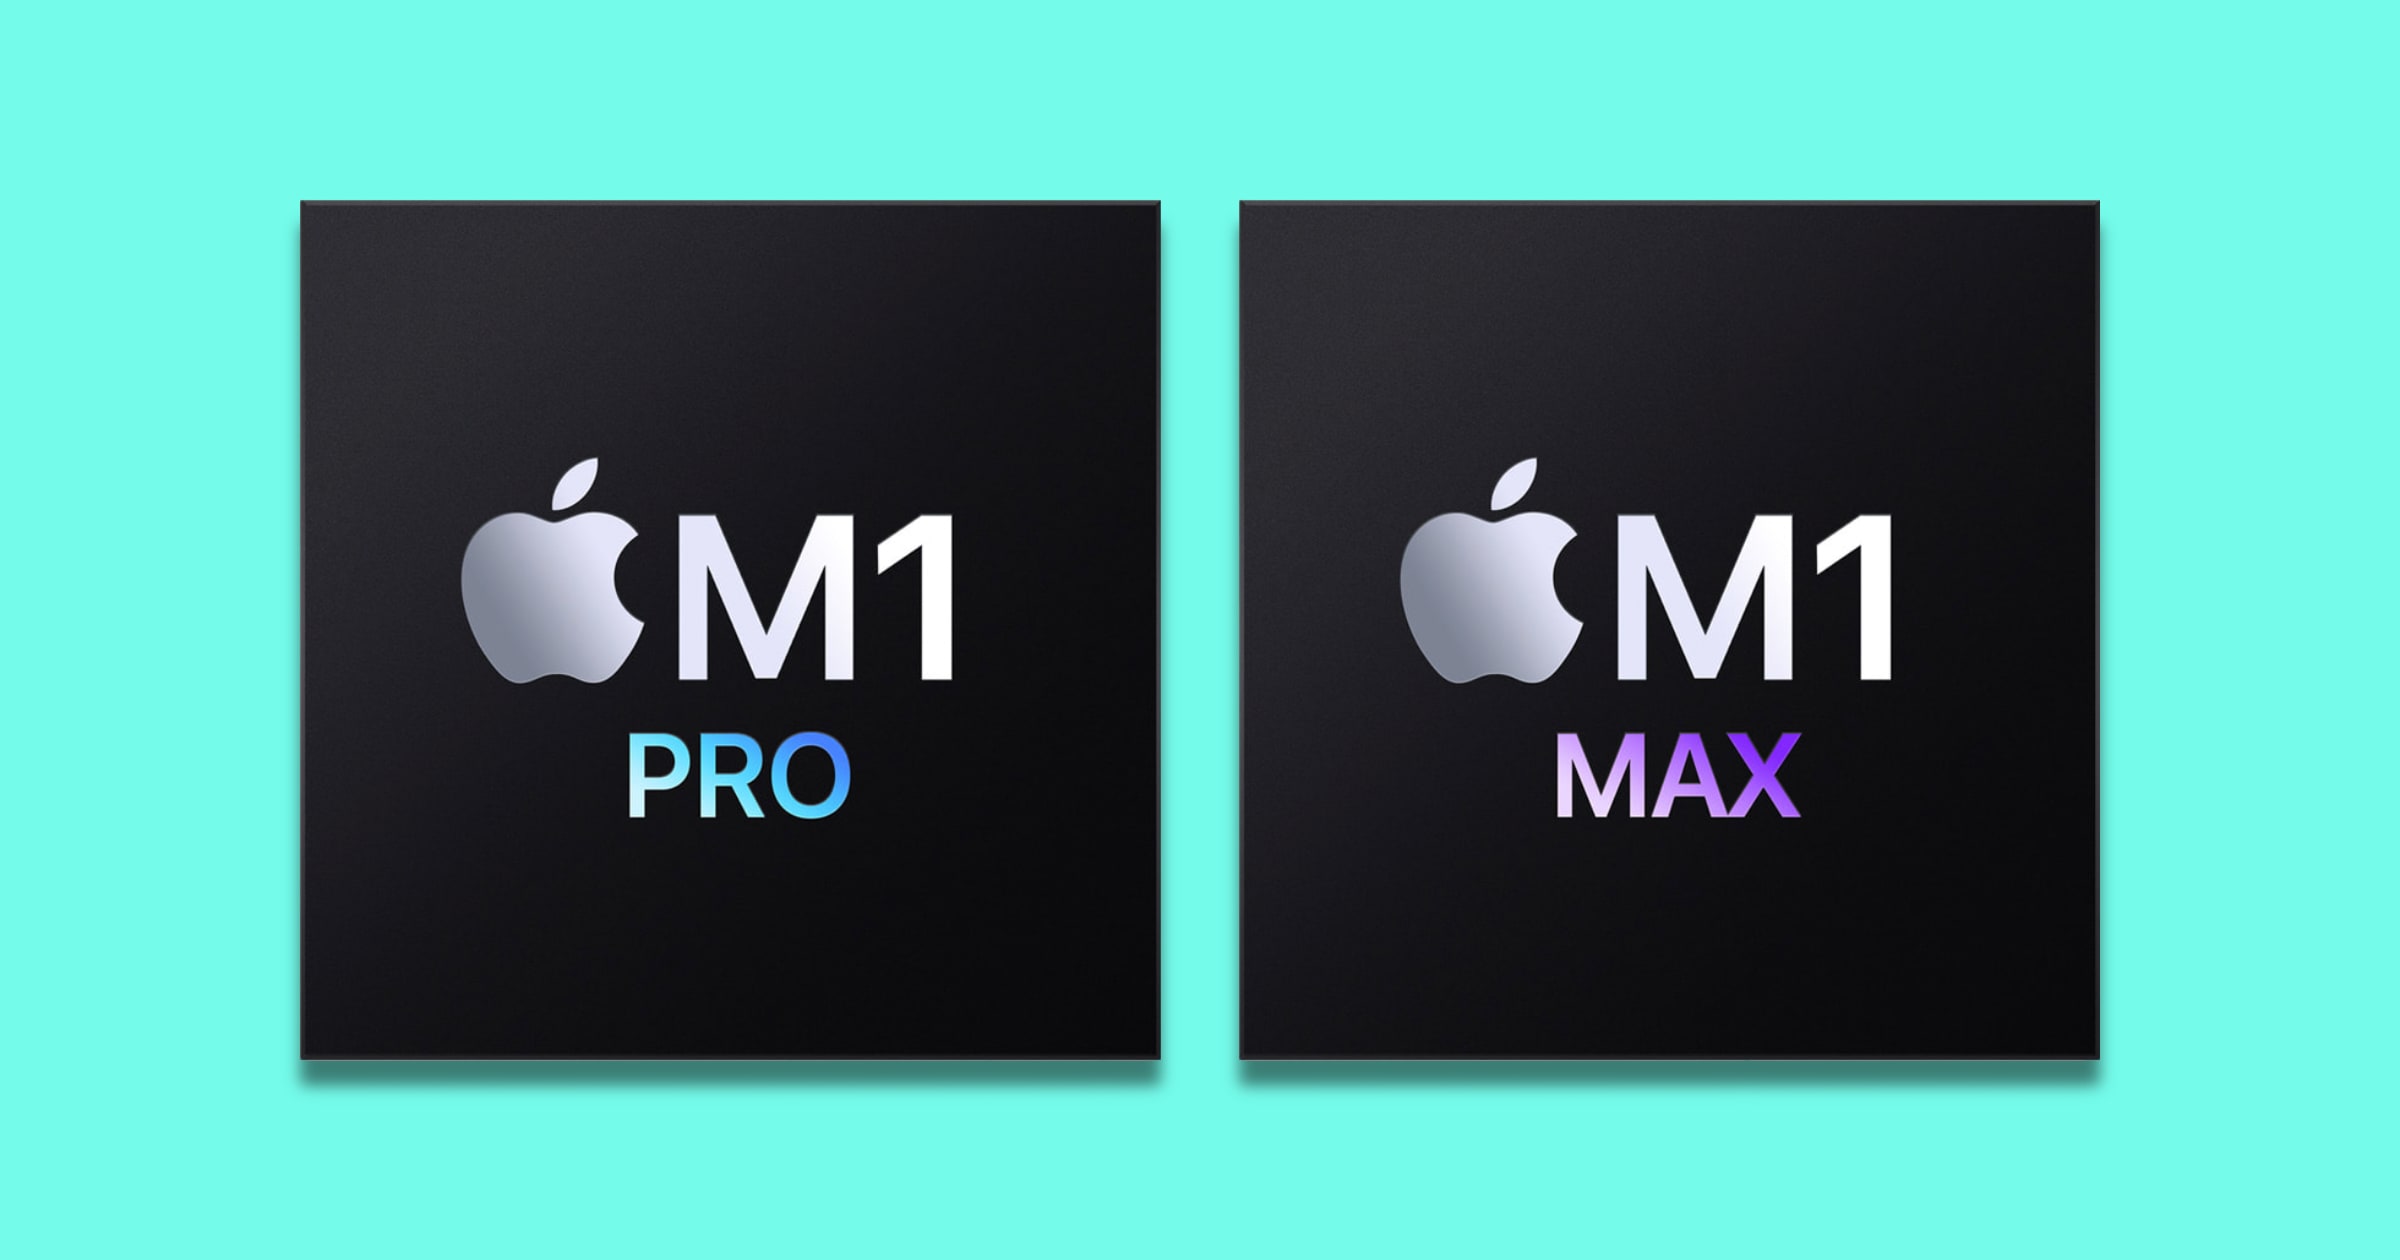 How Well Do the M1 Pro and M1 Pro Max Chips Handle Games?